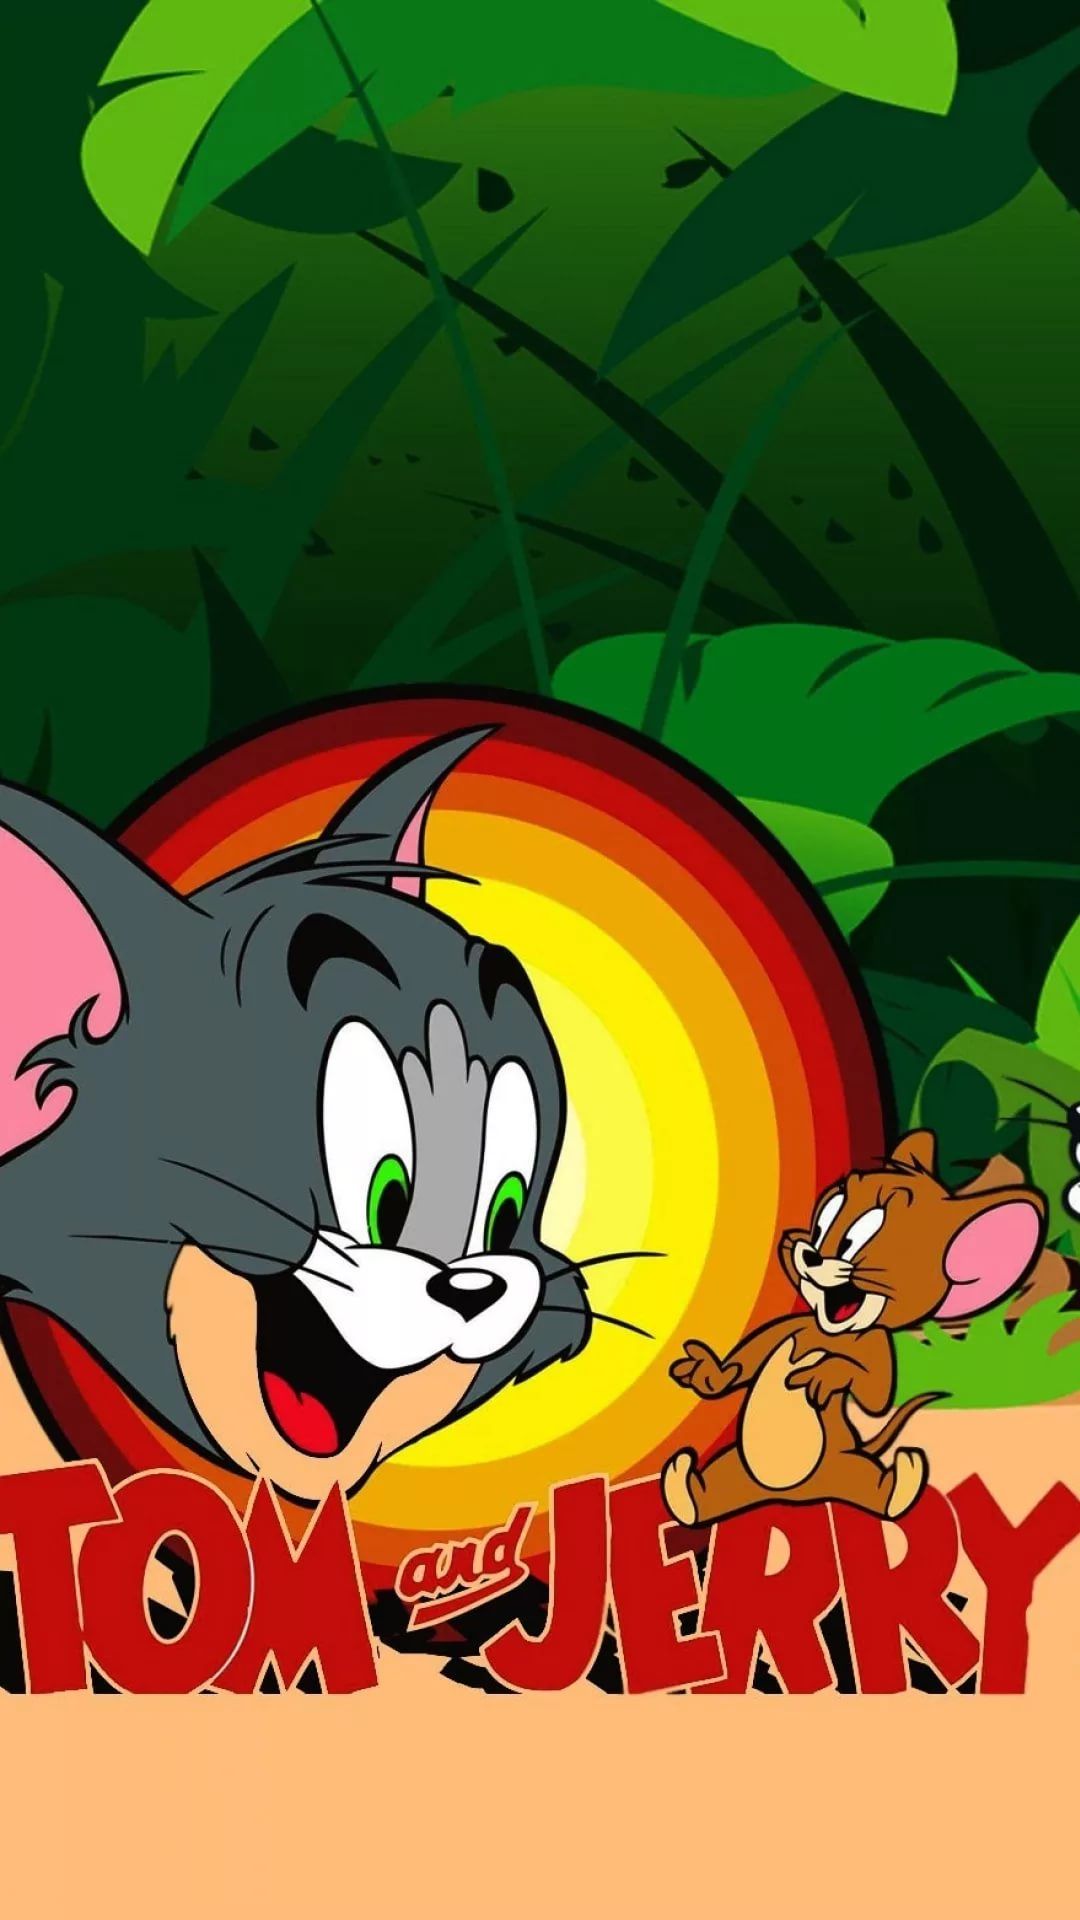 Tom And Jerry iPhone 6 wallpaper hd